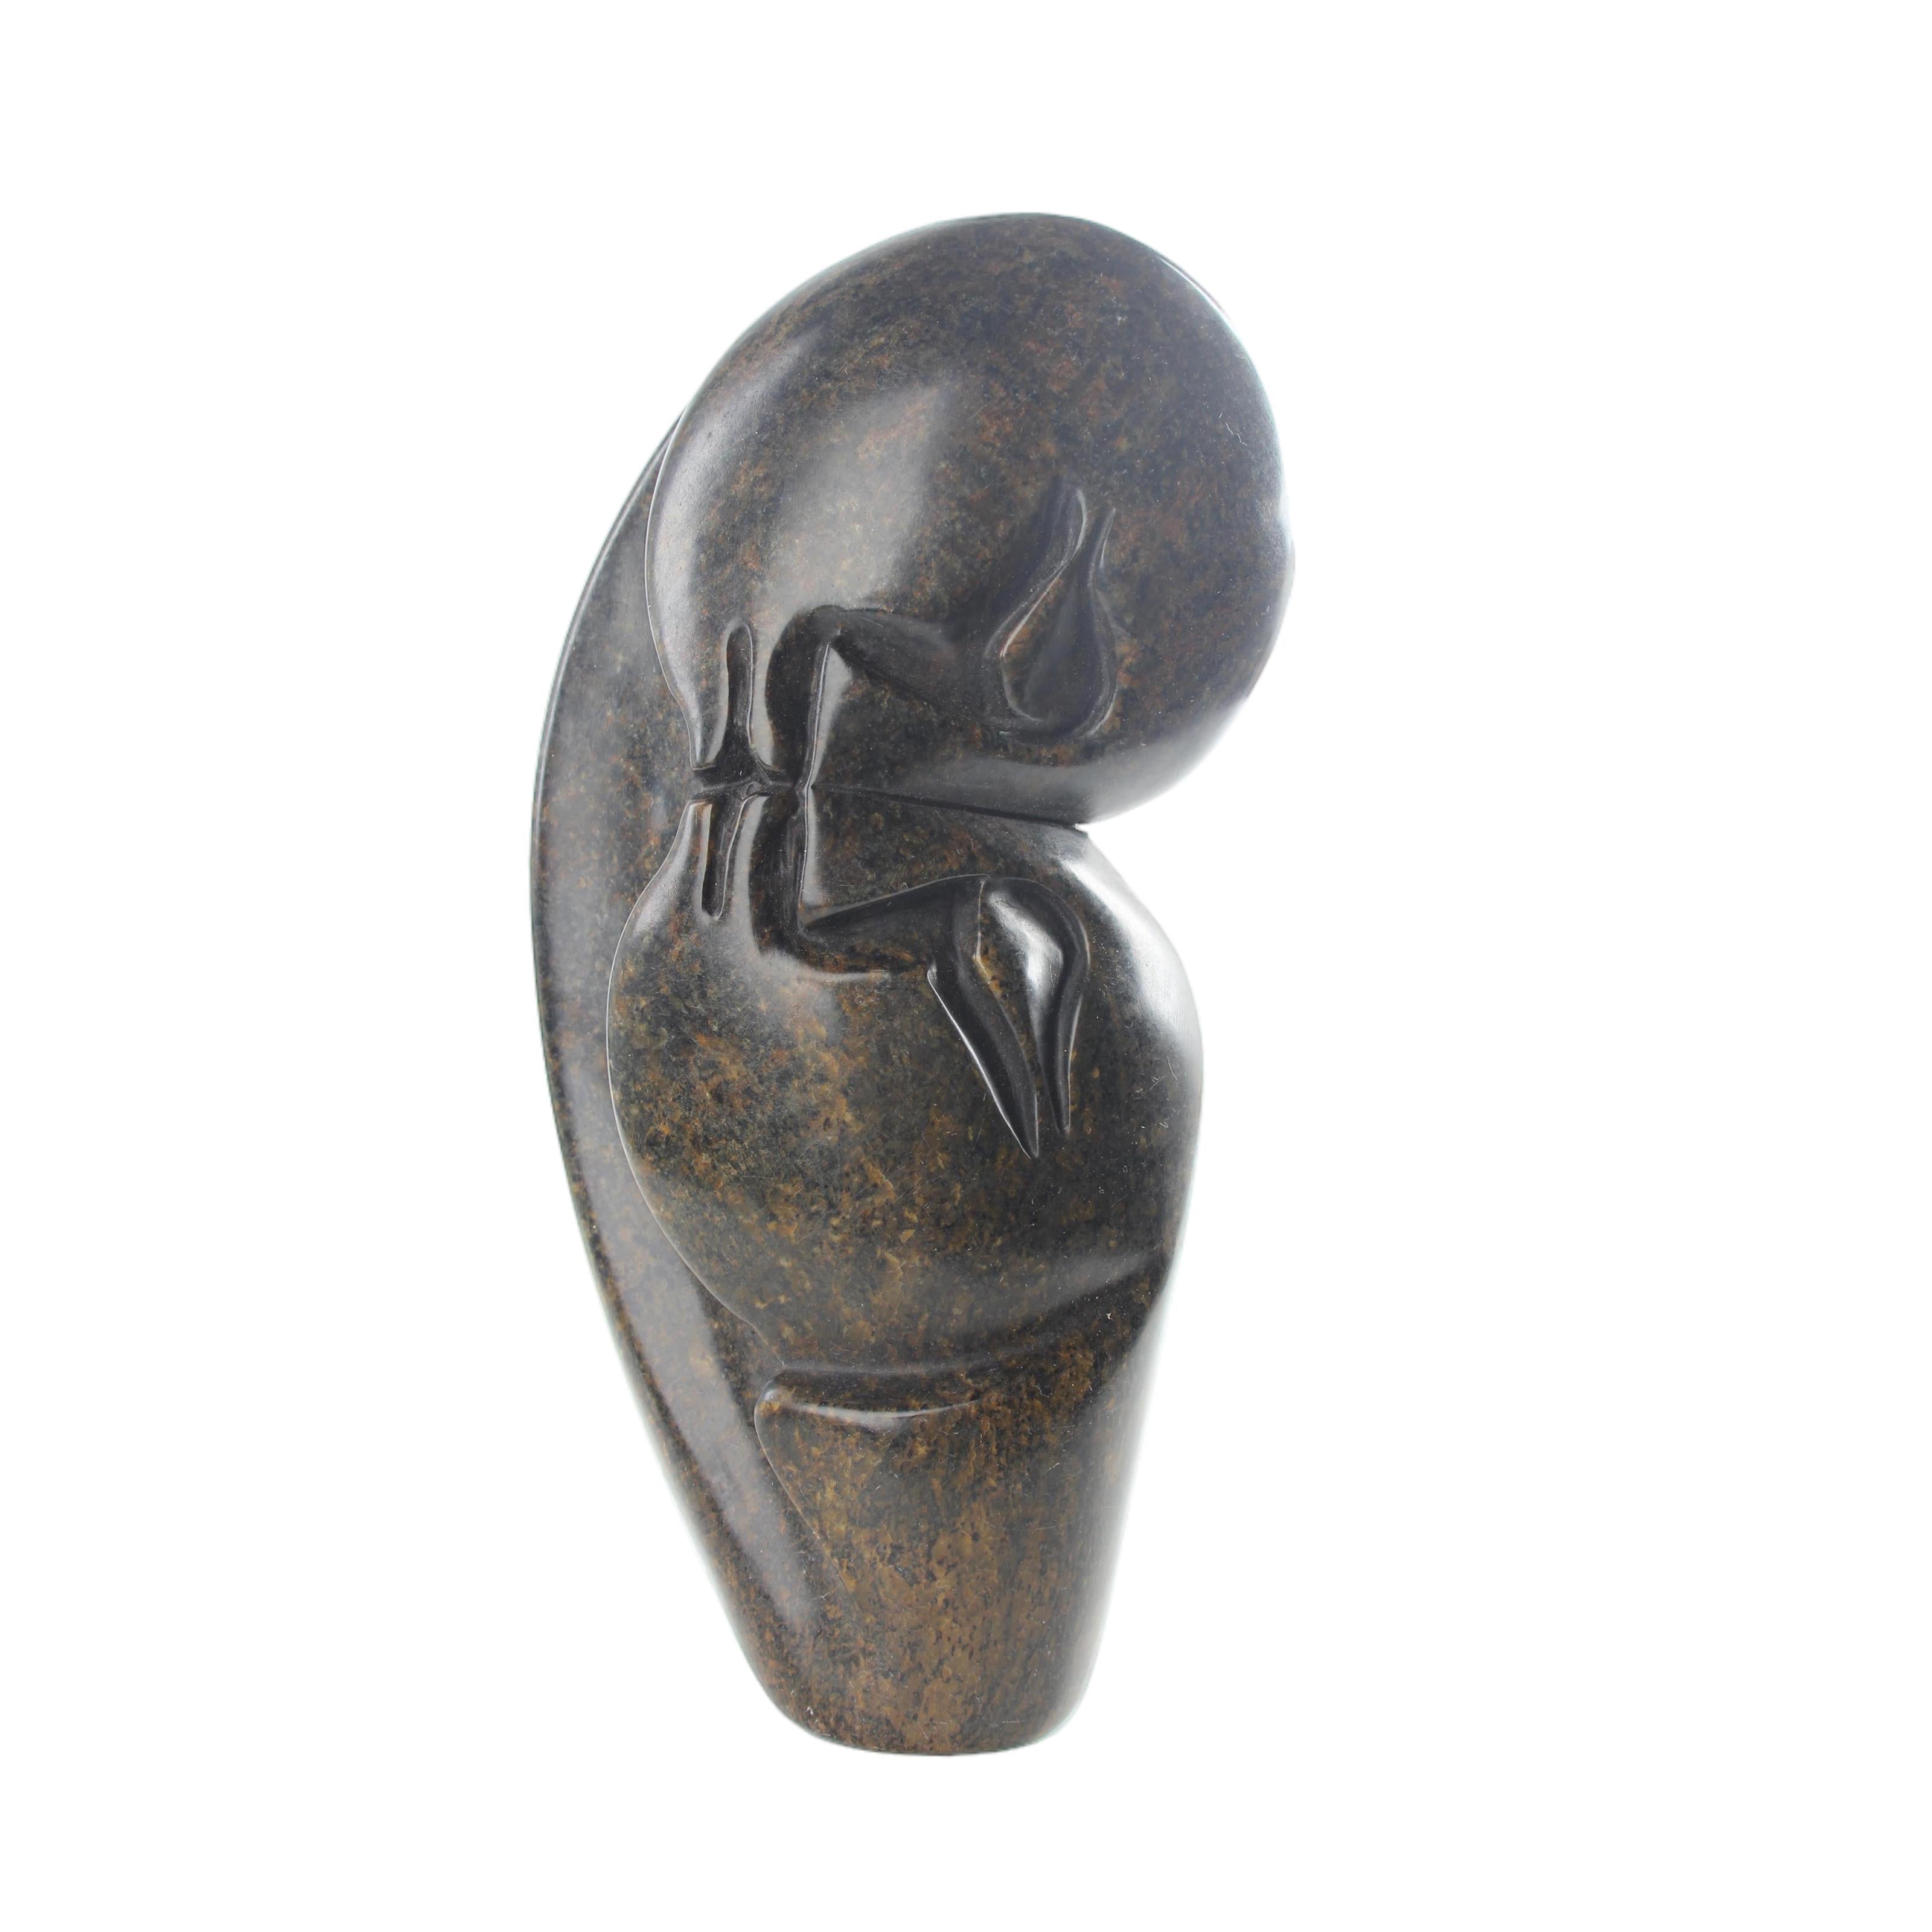 Shona Tribe Serpentine Stone Lovers ~9.4" Tall - Lovers